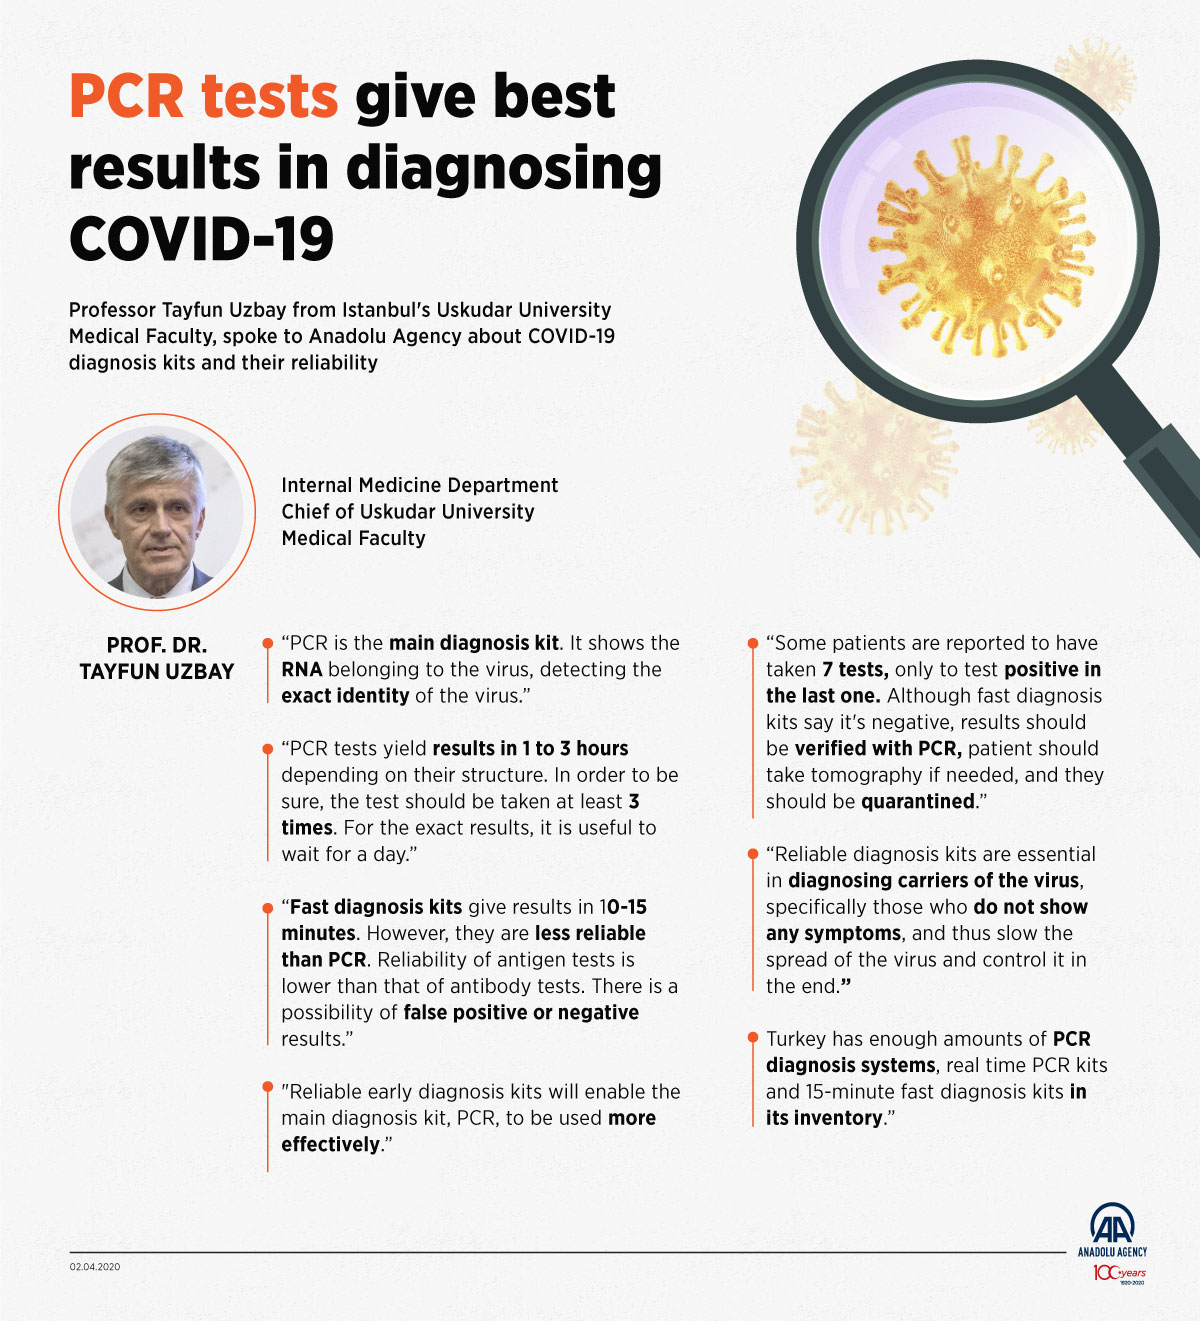 PCR tests give best results in diagnosing COVID-19